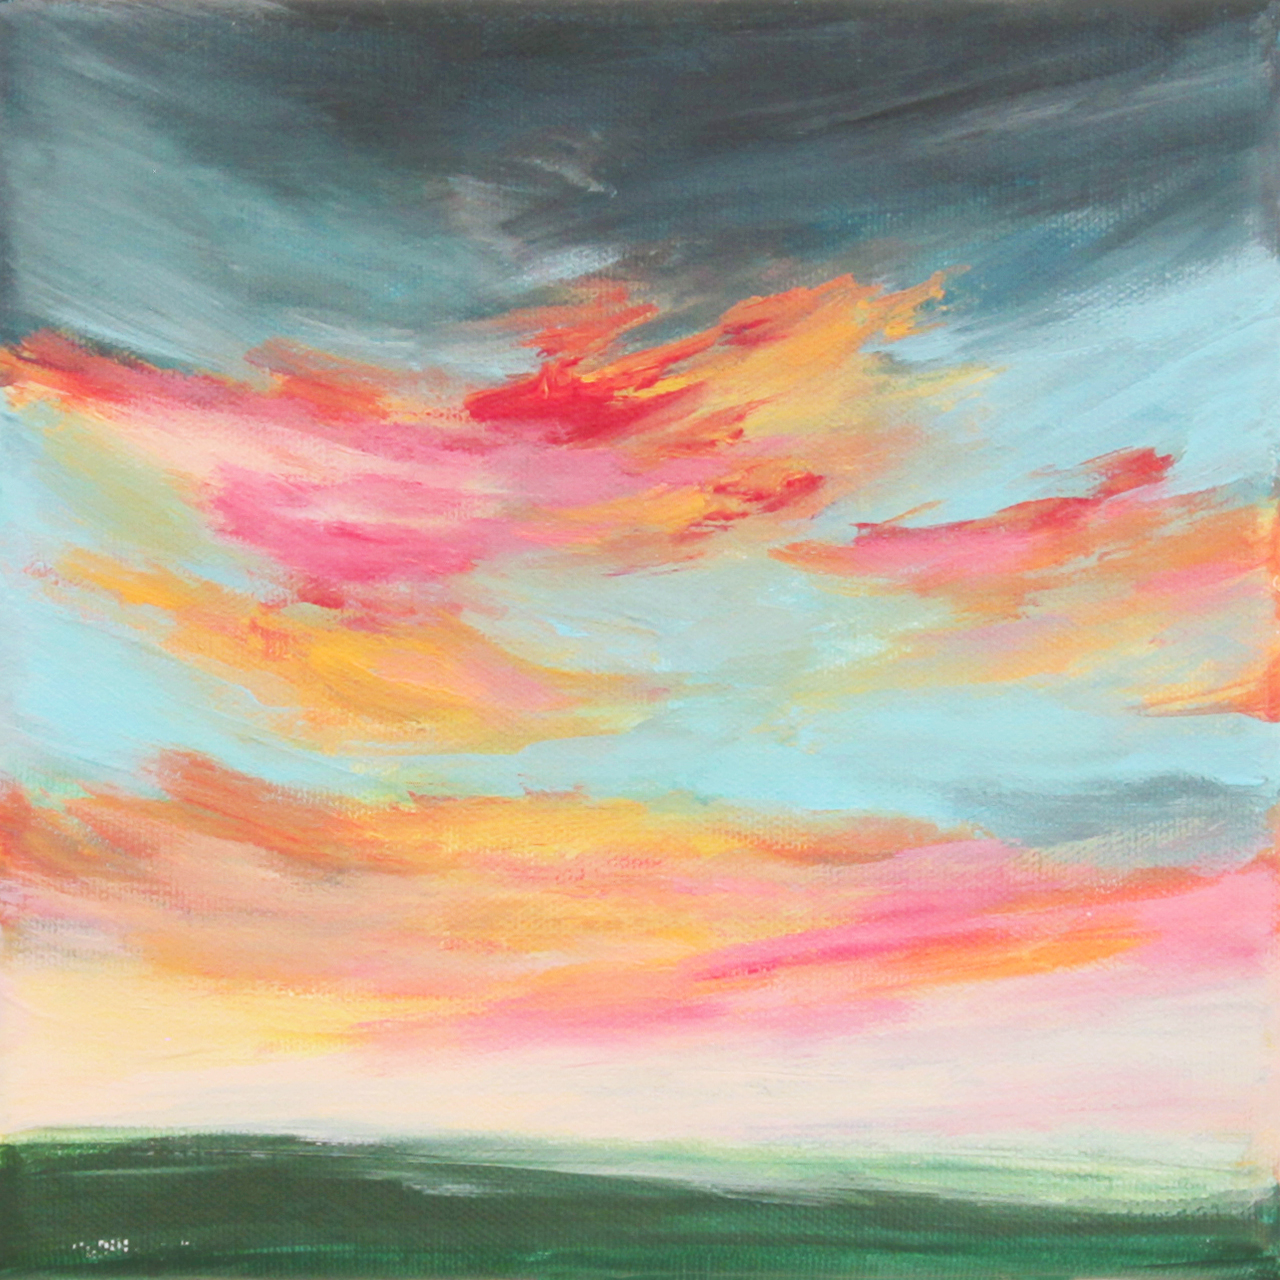 Sunset with clouds 2